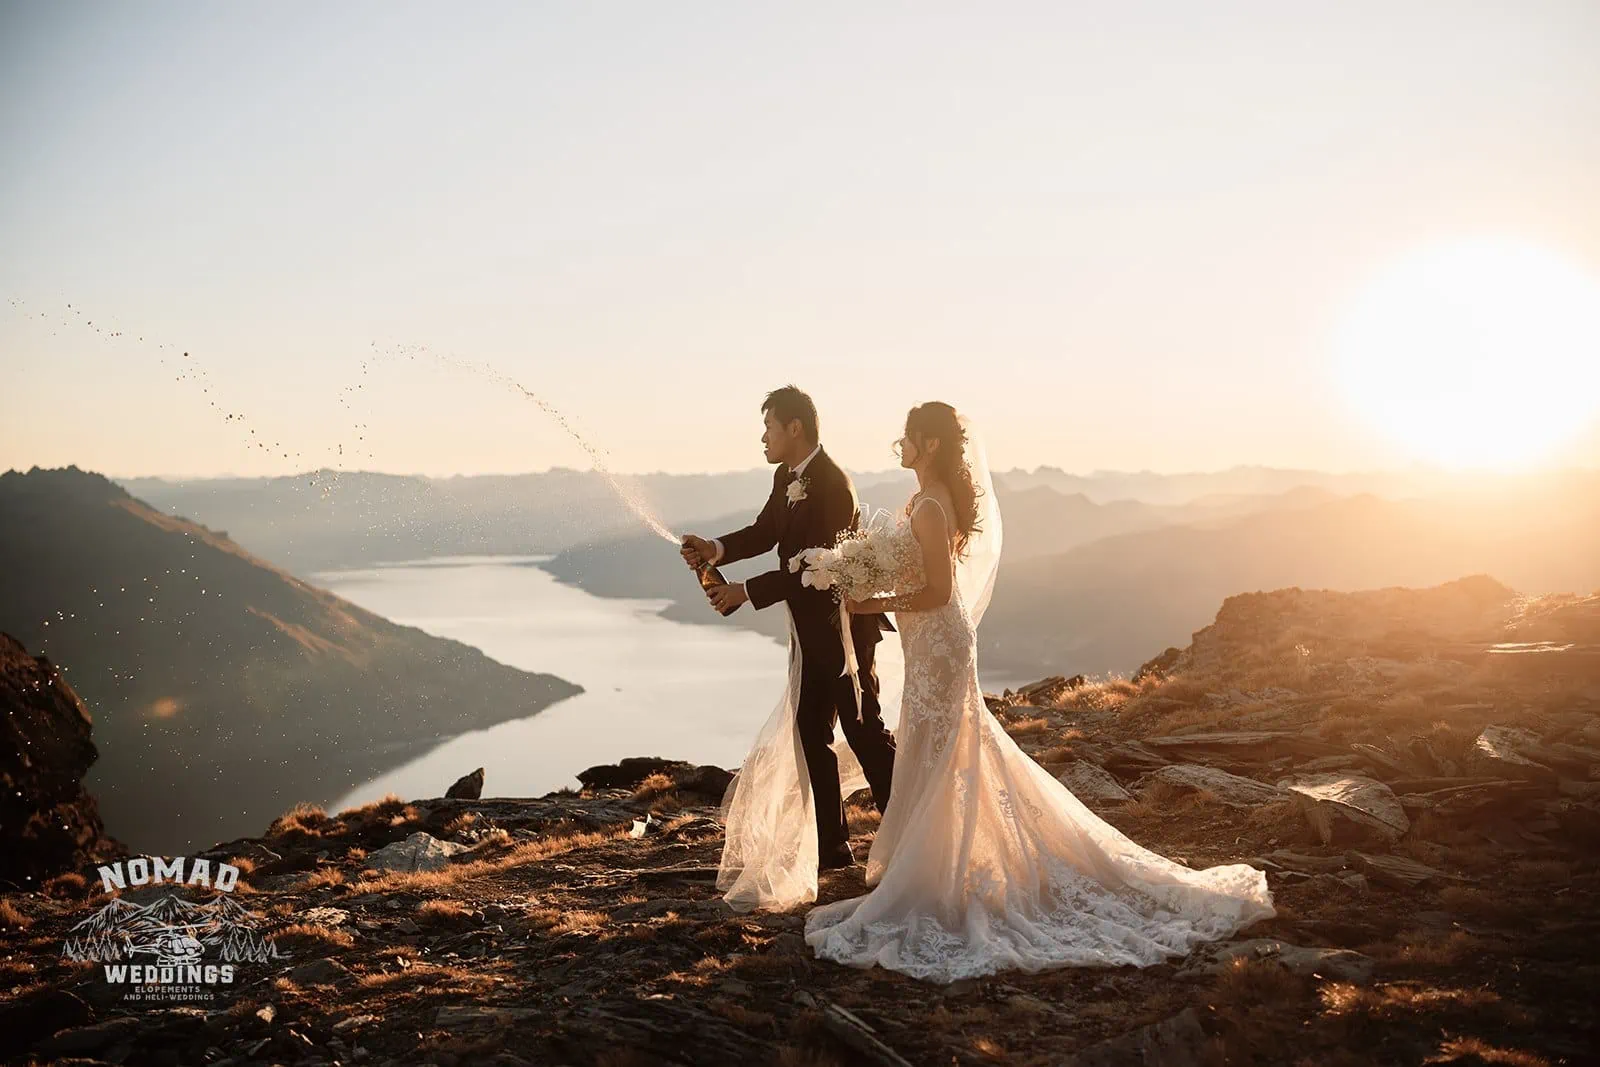 Connie and Andrew's pre-wedding shoot on The Remarkables mountain at sunset.